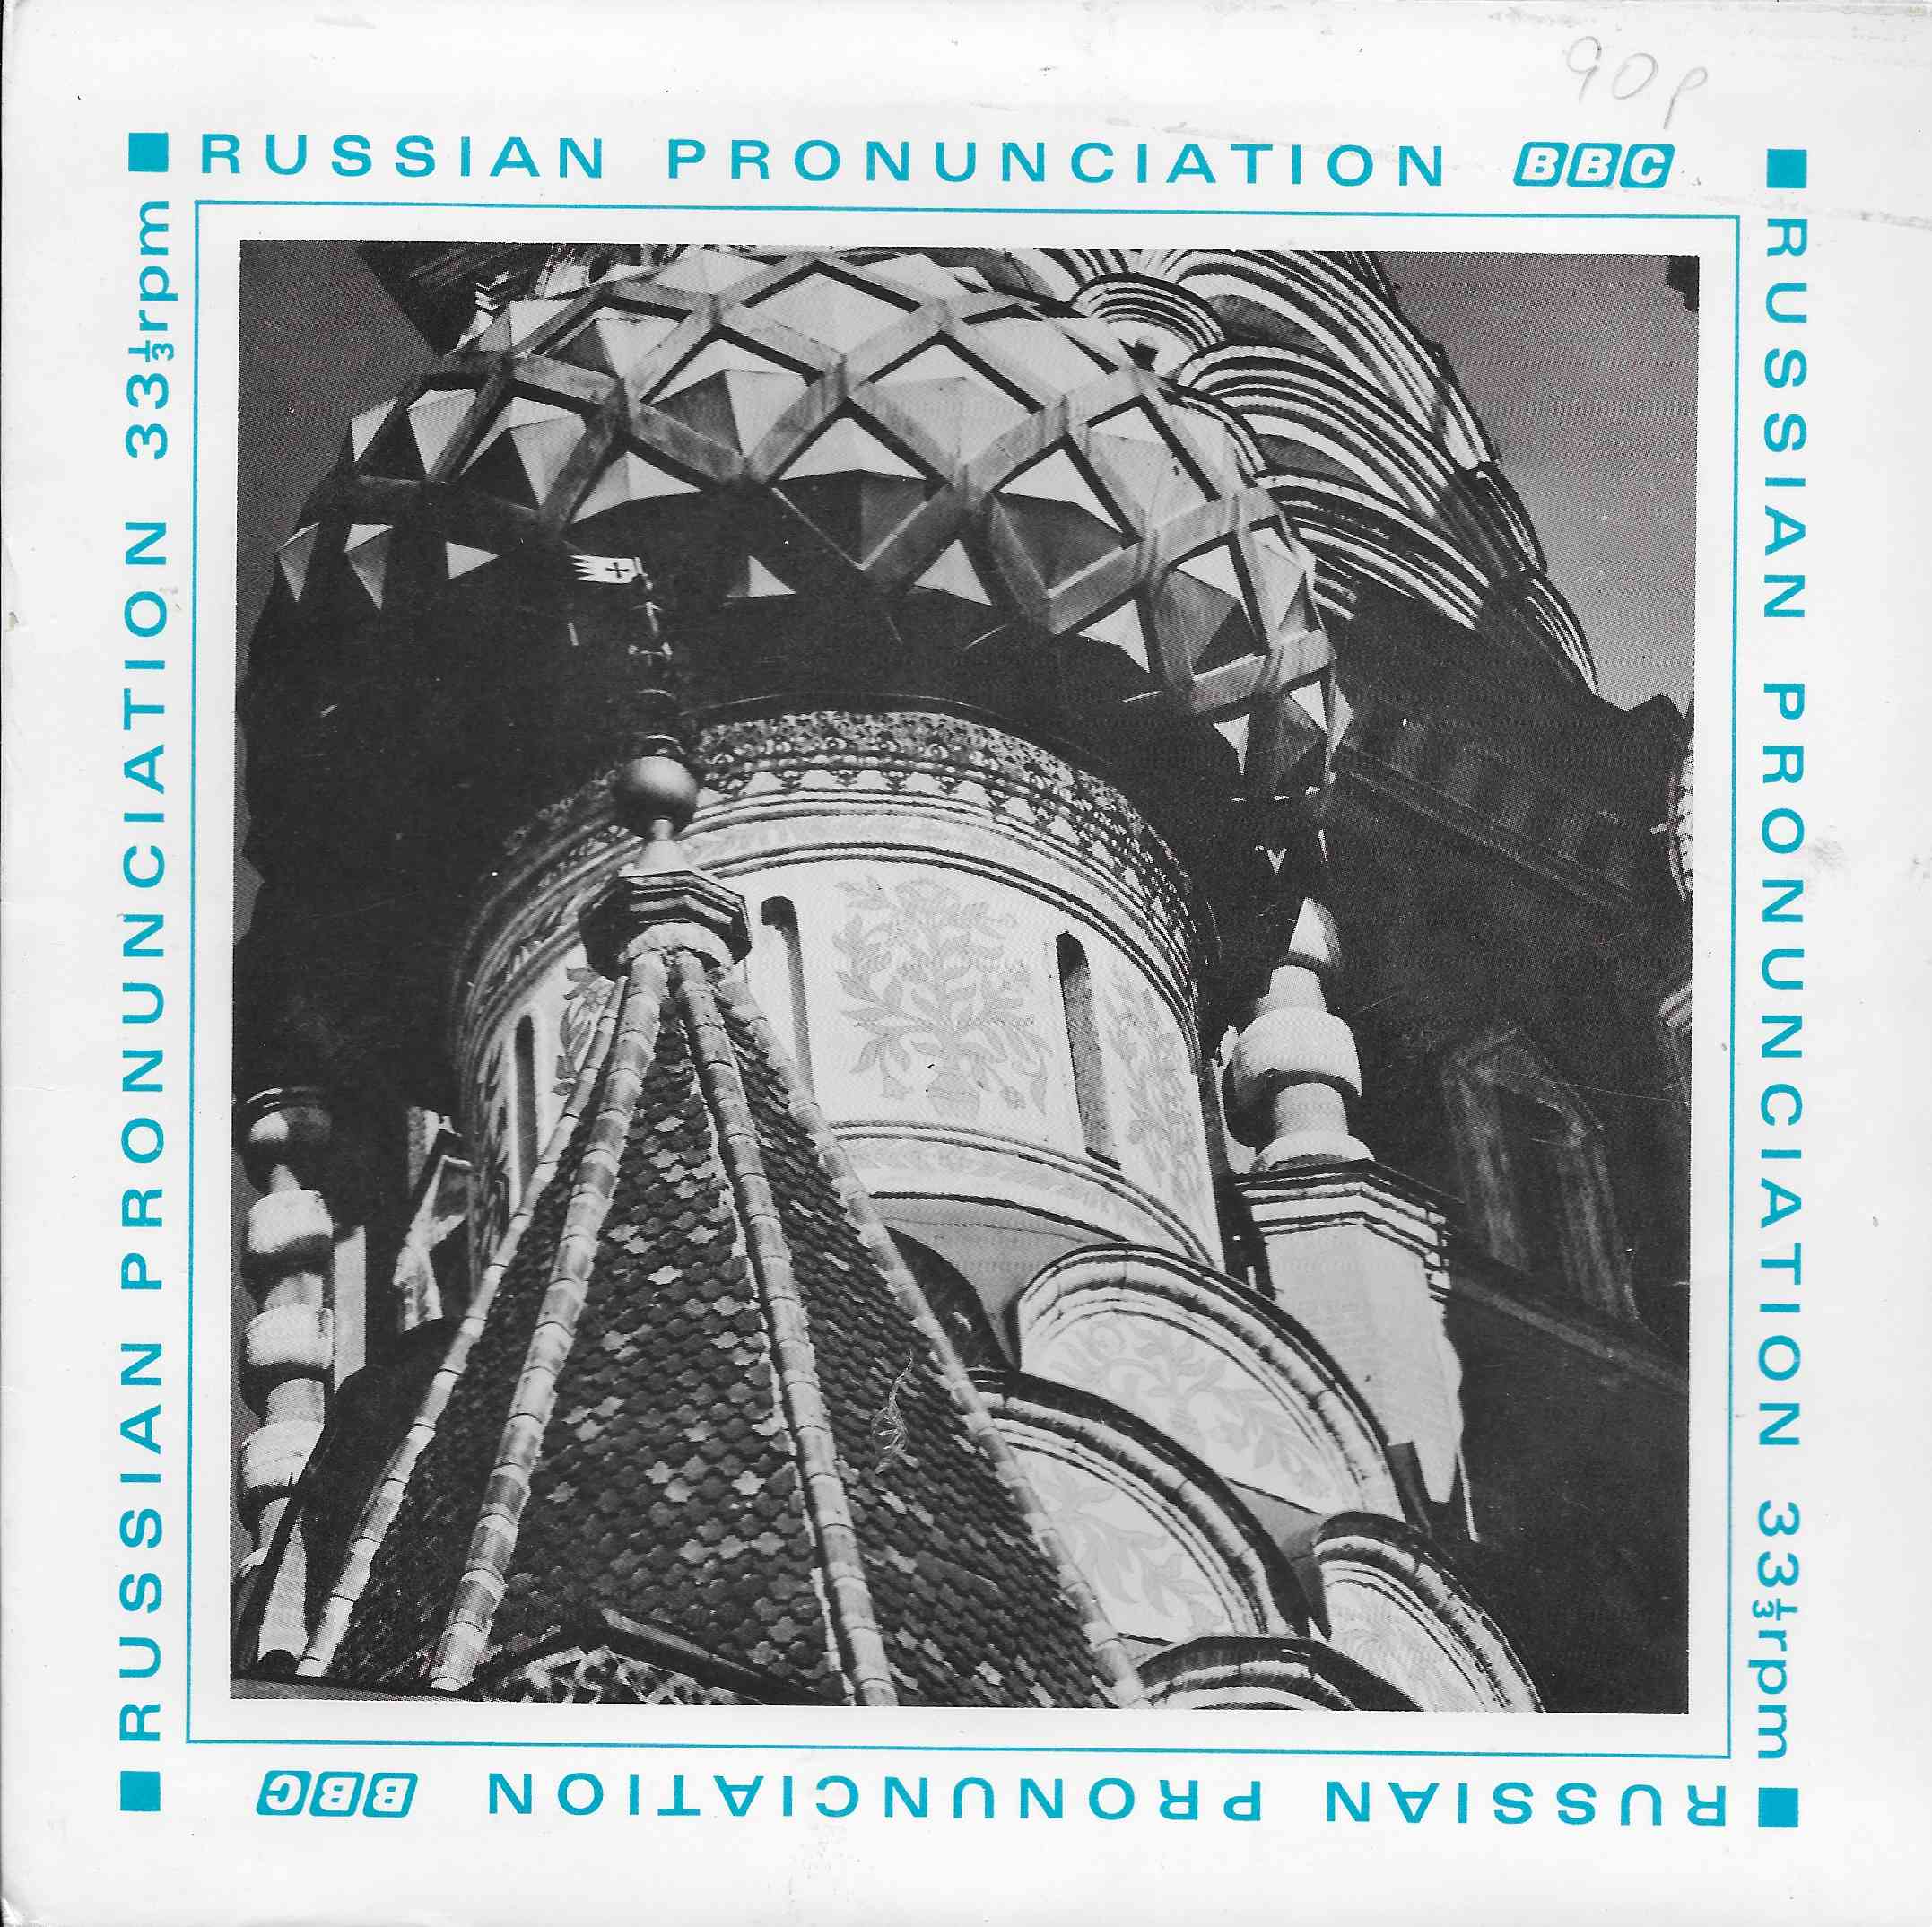 Picture of OP 197 Russian pronunciation by artist Natalie Waterson from the BBC records and Tapes library